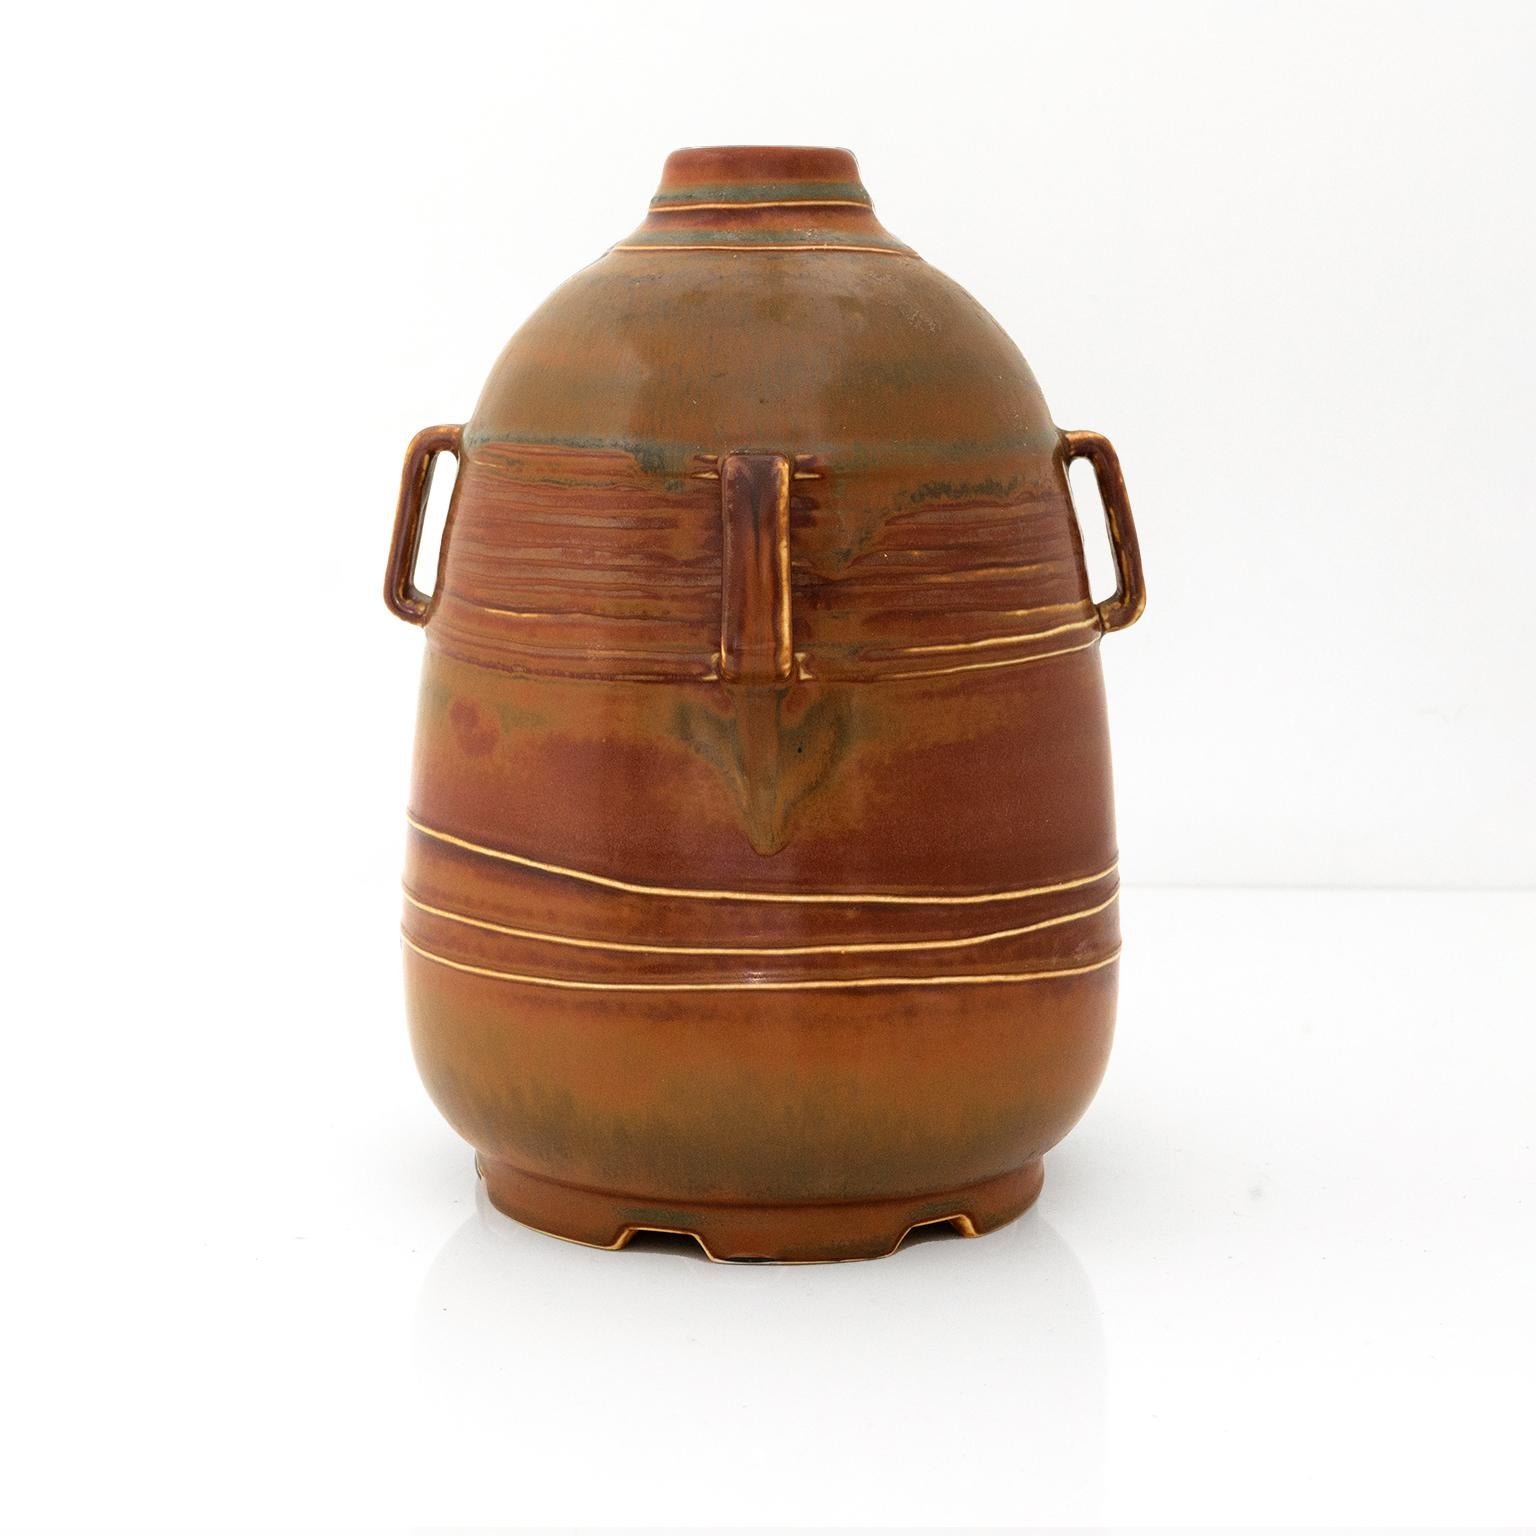 Ebbe Sadolin, unique stoneware vase in a brown and gold glaze, detailed with four “handles”, wavy horizontal raised lines and a notched footed base. Signed ES, stamped maker's mark, 104 and u720. Made in Denmark c. 1940s.
 